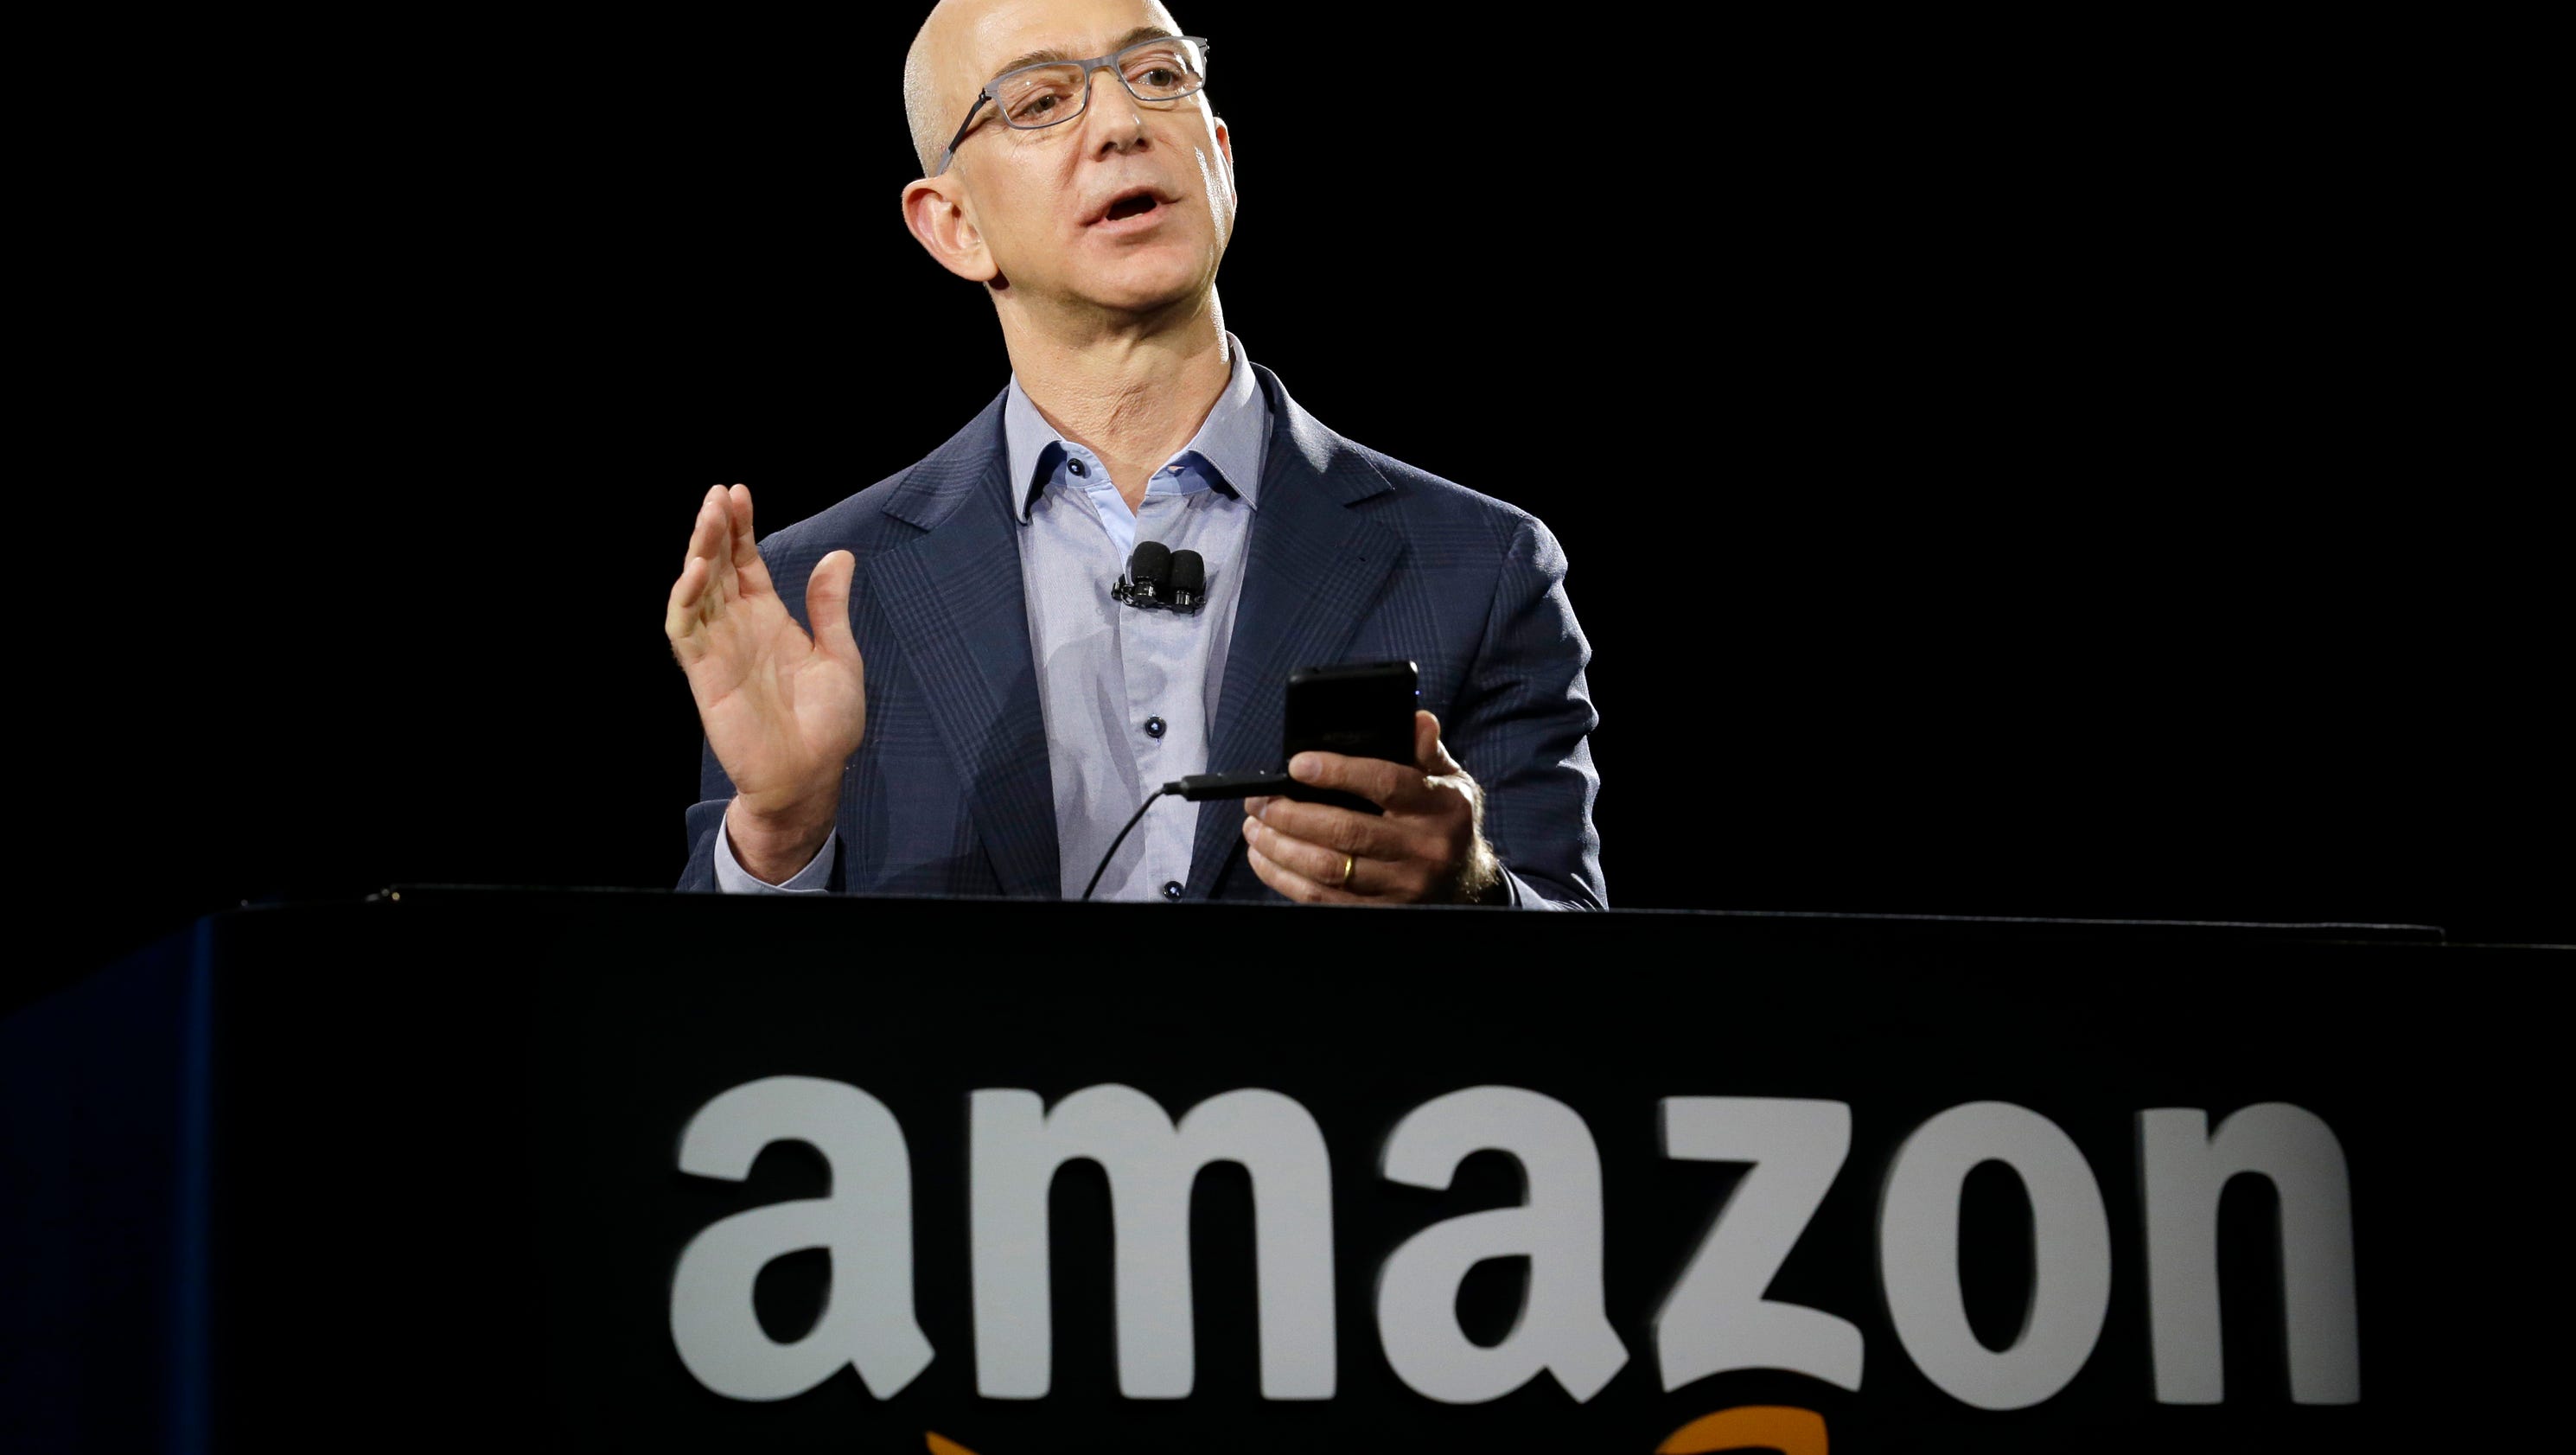 Amazon to add second headquarters with up to 50,000 jobs3200 x 1680